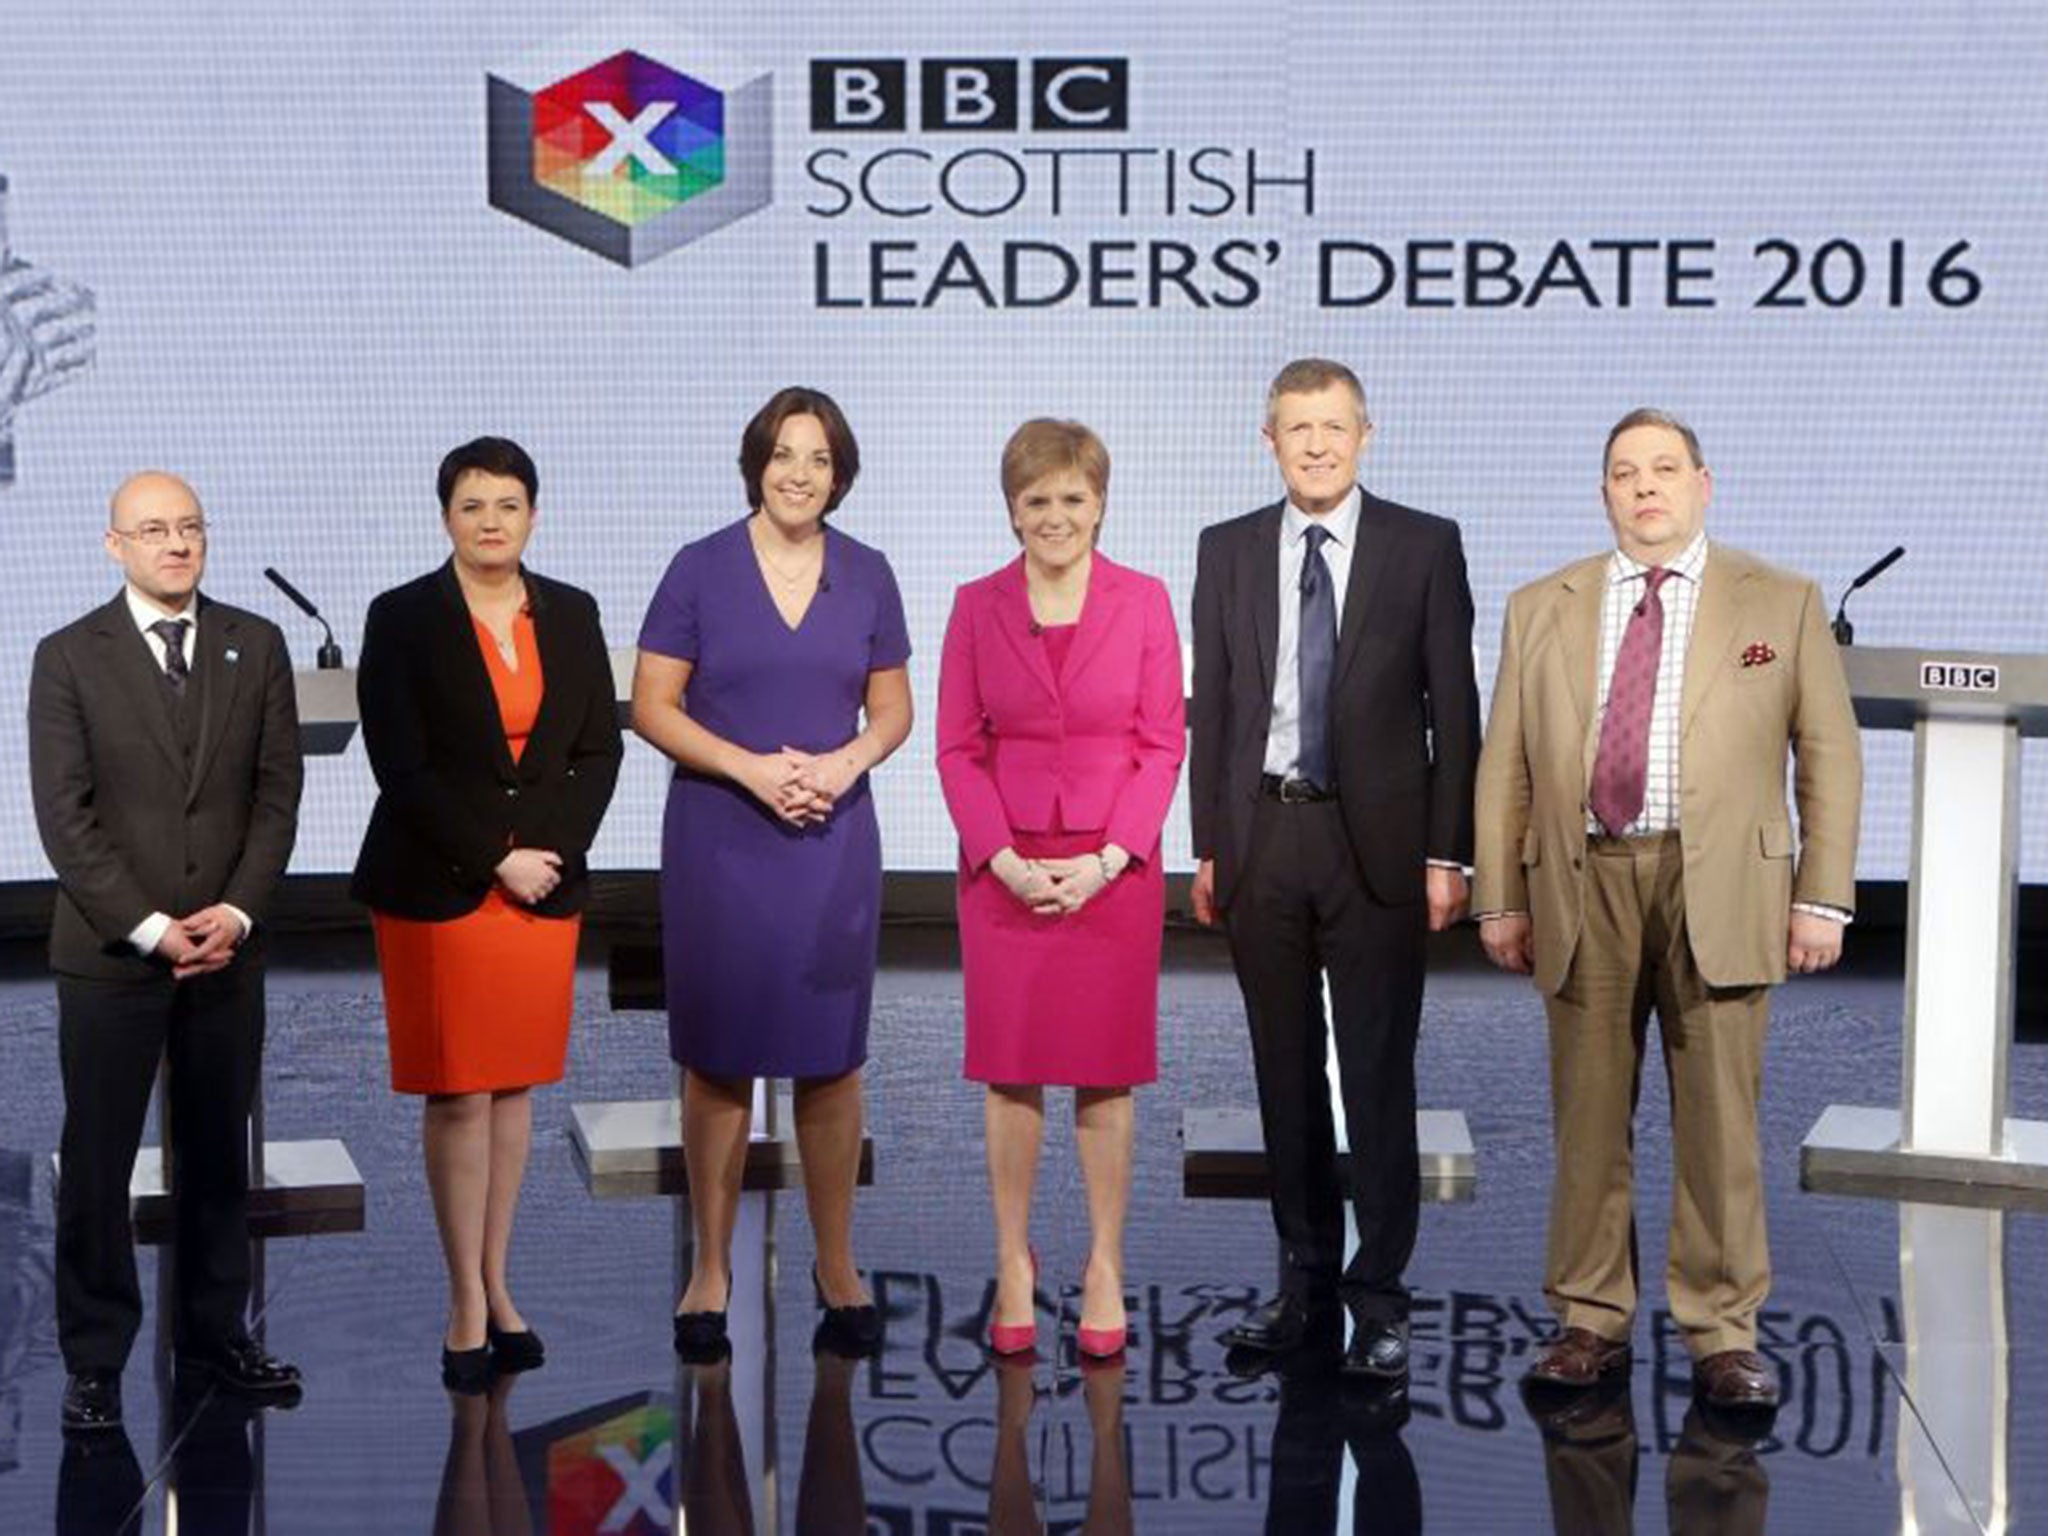 Left to right: Leader of Scottish Green Party, Patrick Harvie; Leader of Scottish Conservative Party, Ruth Davidson; Leader of Scottish Labour Party, Kezia Dugdale; Leader of the Scottish National Party, Nicola Sturgeon; Leader of the Scottish Liberal Democrats, Willie Rennie; UKIP MEP, David Coburn; ahead of the first televised Leaders Debate of the Scottish Parliament election campaign